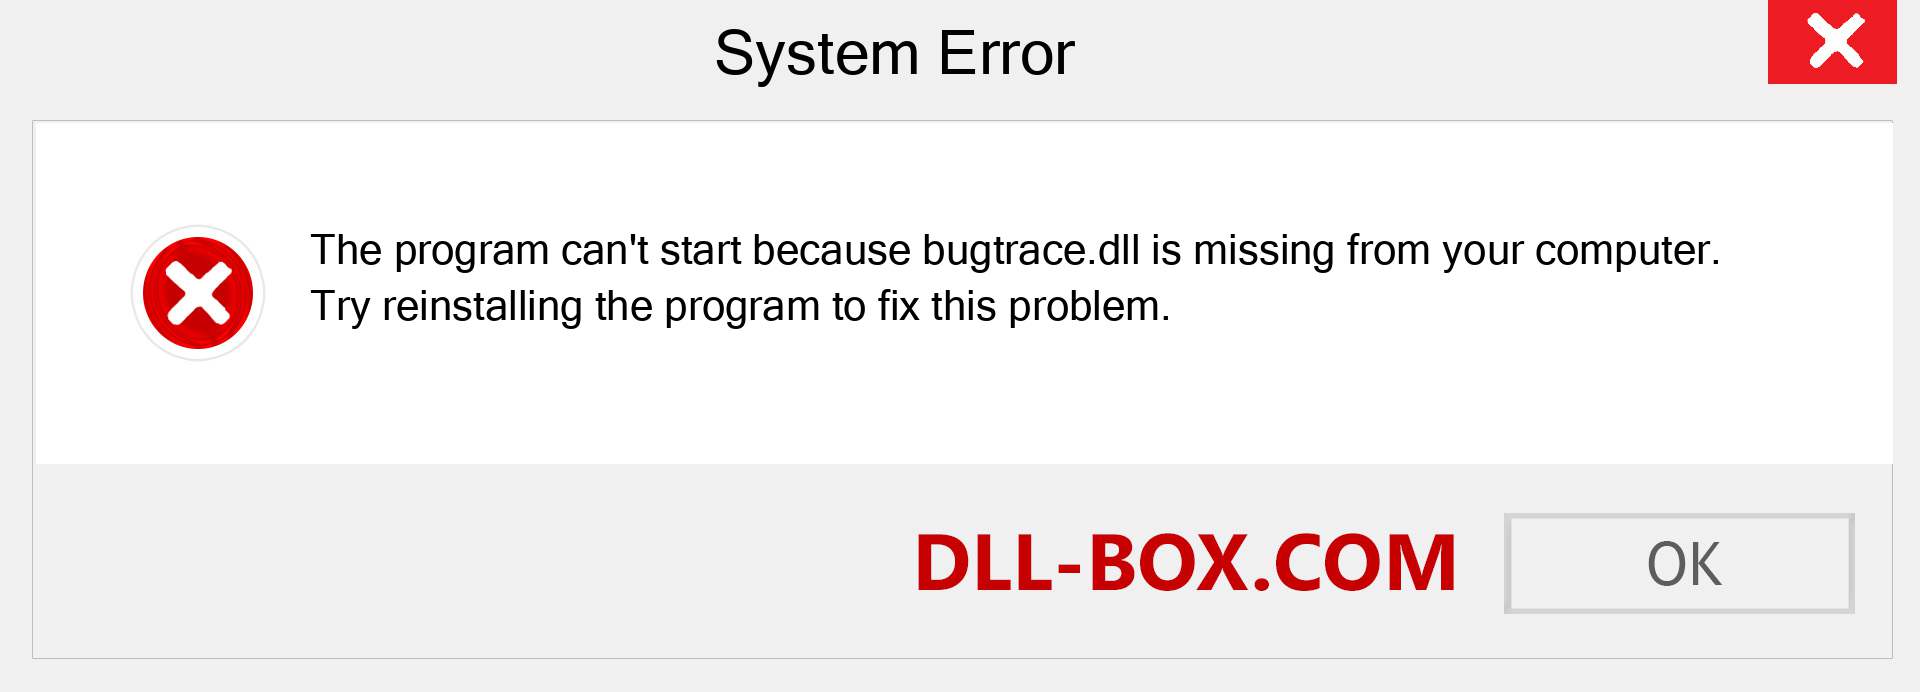  bugtrace.dll file is missing?. Download for Windows 7, 8, 10 - Fix  bugtrace dll Missing Error on Windows, photos, images